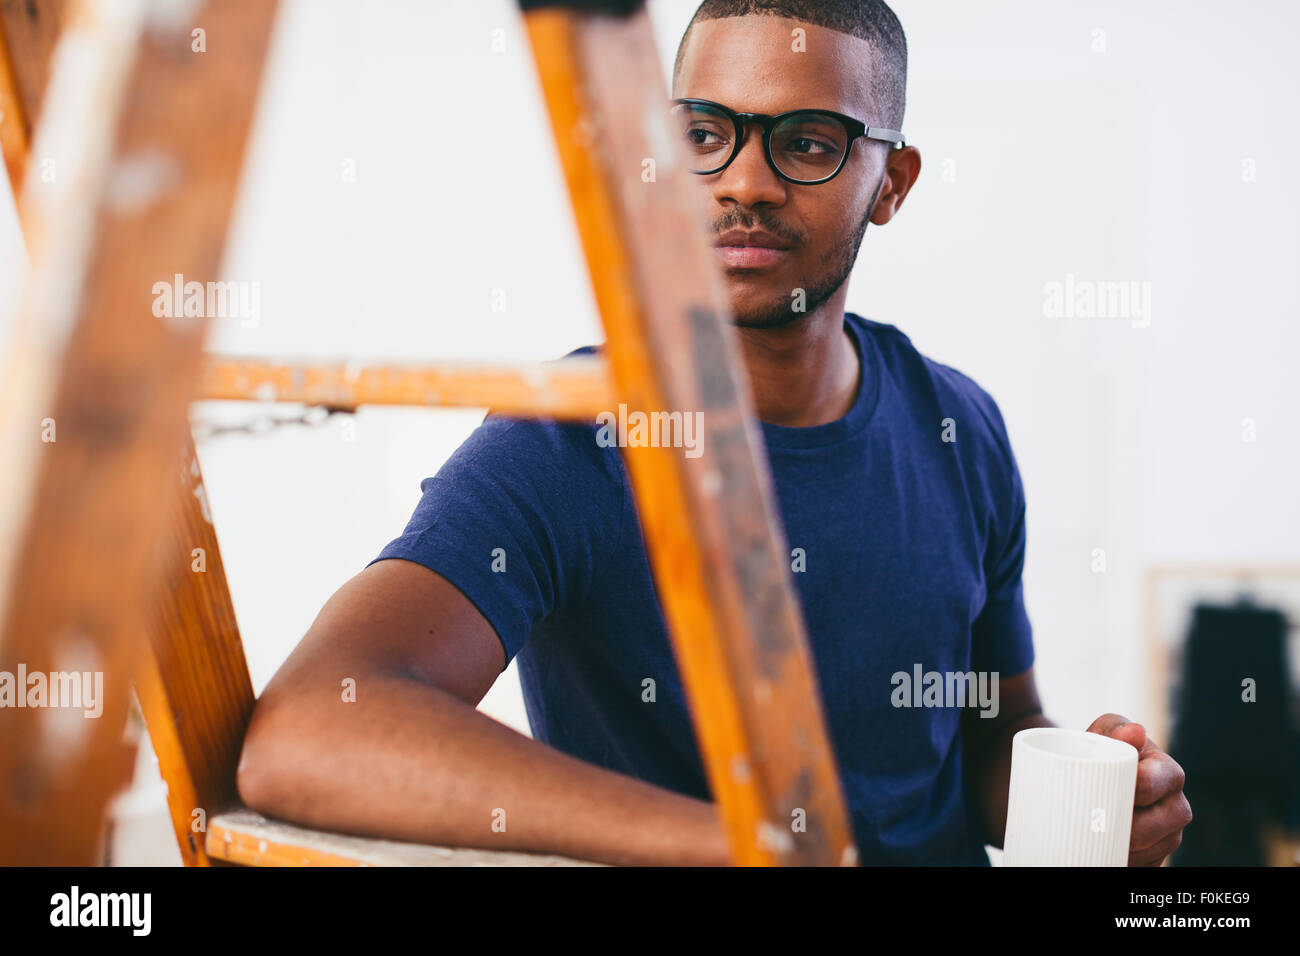 Young man leaning on step ladder having a coffee break Stock Photo